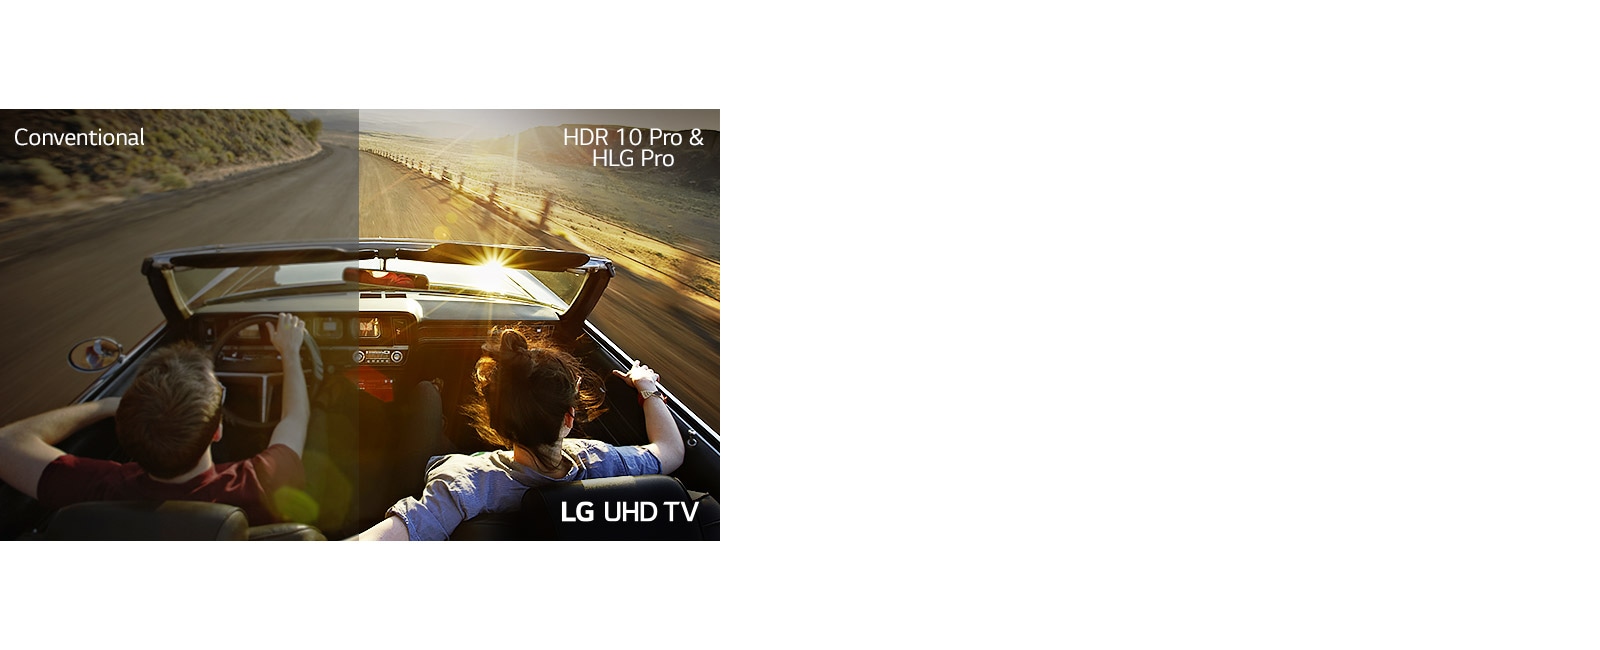 A couple in a car driving down a road. Half is shown on a conventional screen shown with poor picture quality. The other half shown with crisp, vivid LG UHD TV picture quality.